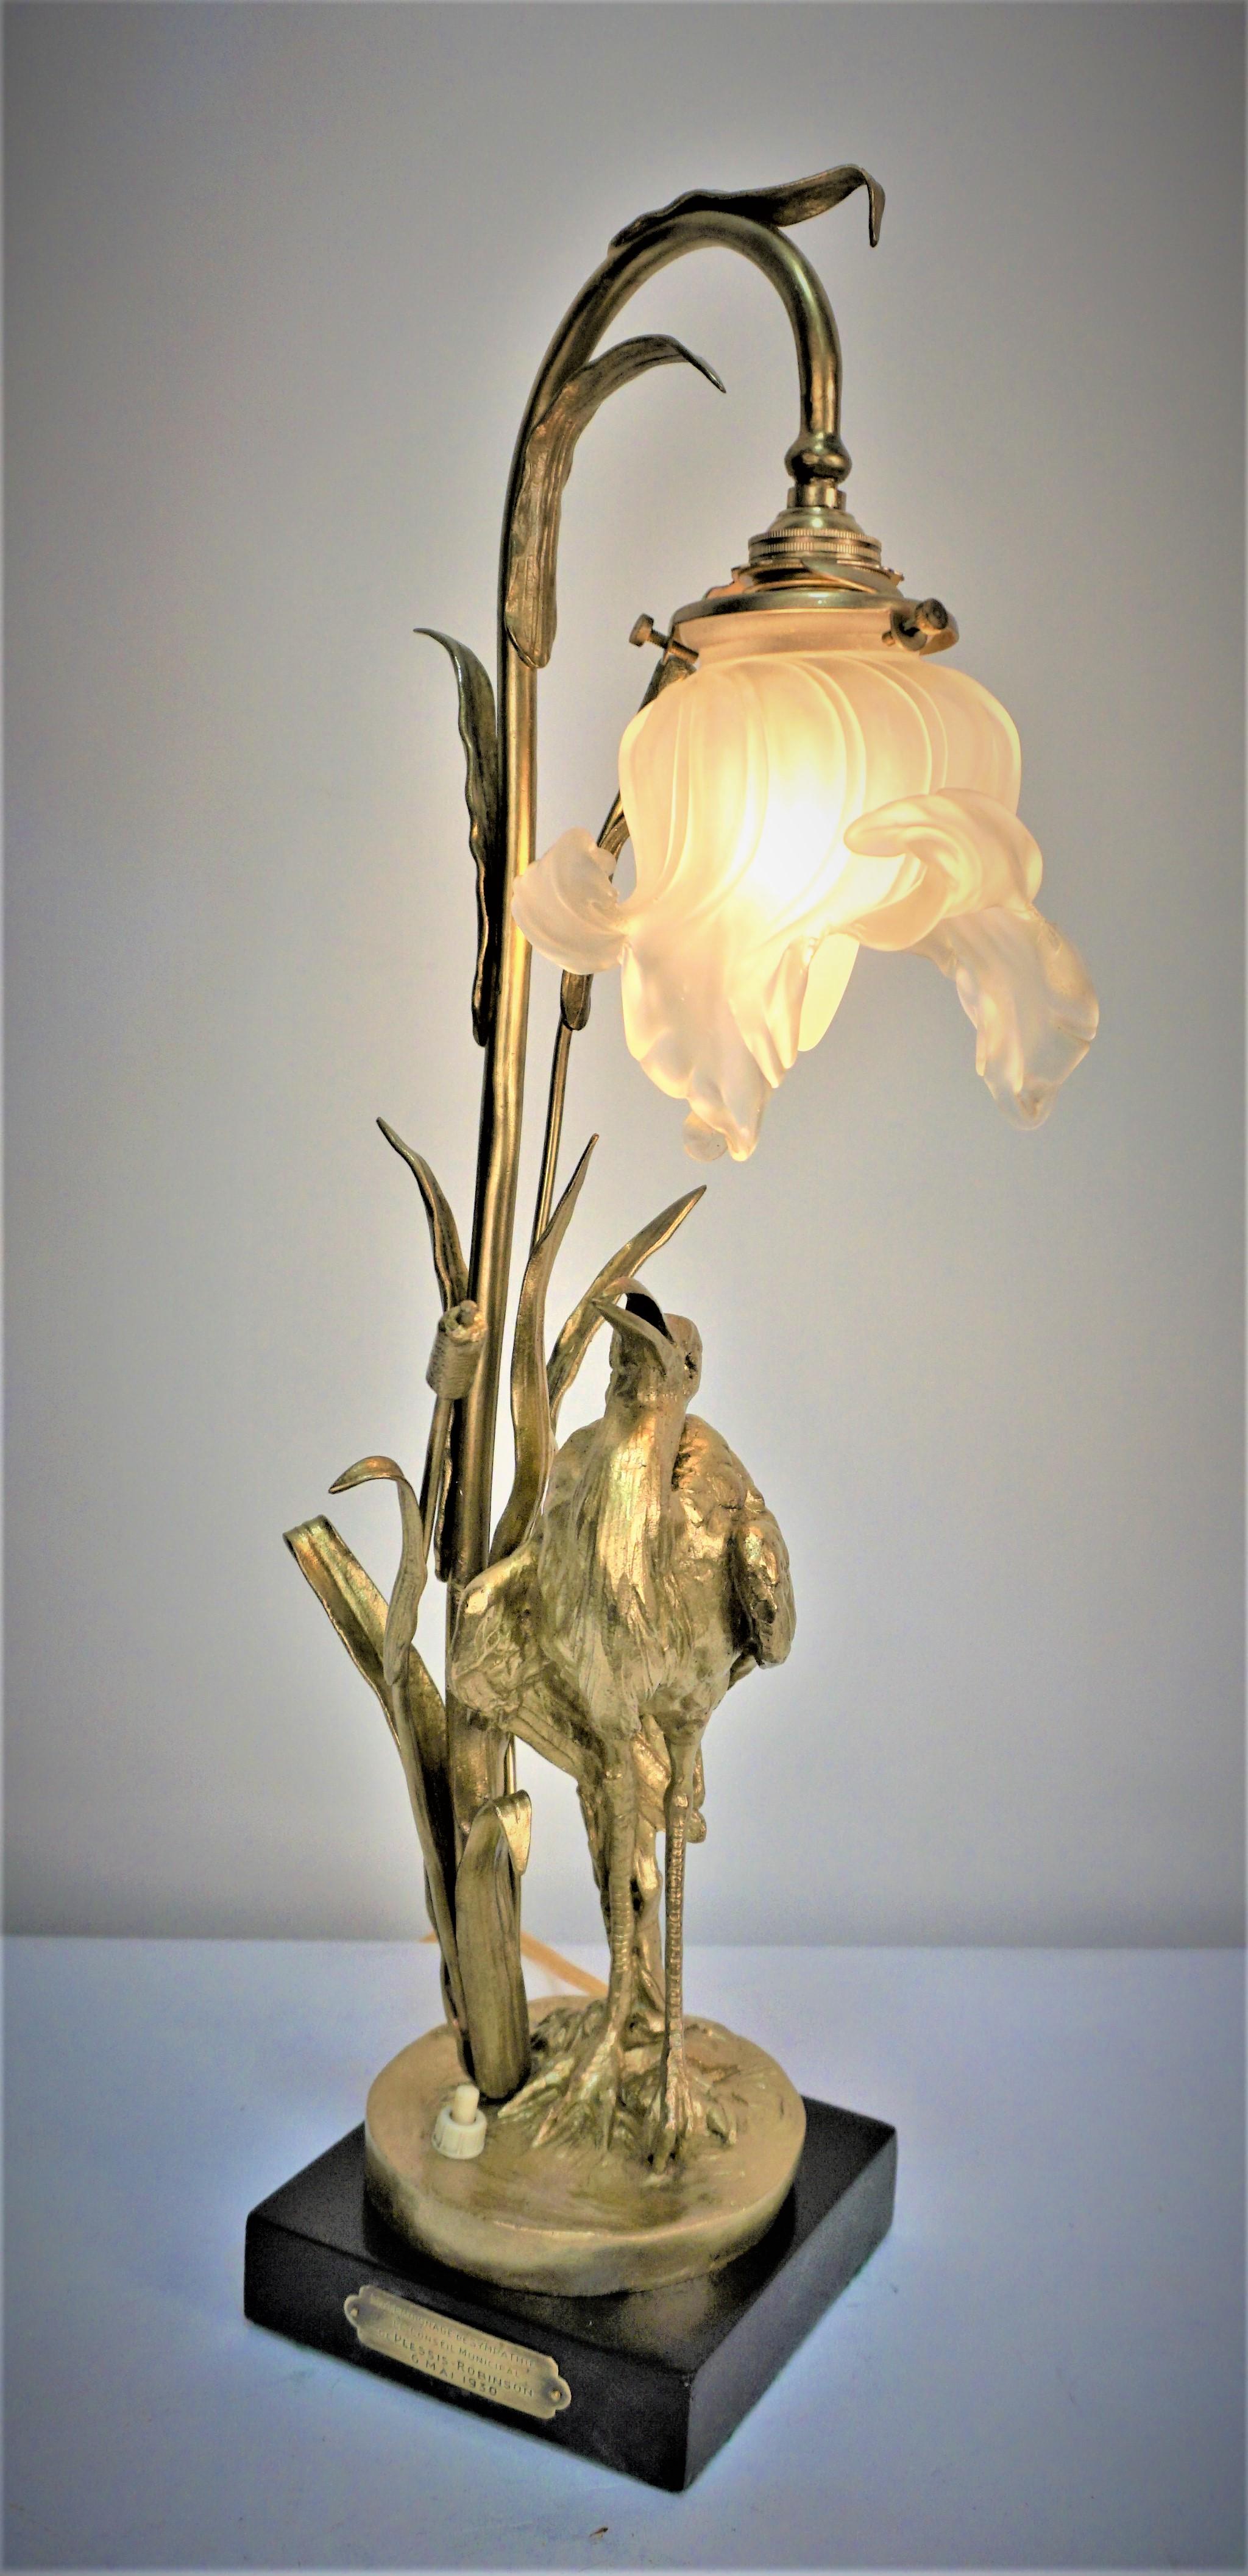 French Art Nouveau Bronze Table Lamp by E. Urbain In Good Condition For Sale In Fairfax, VA